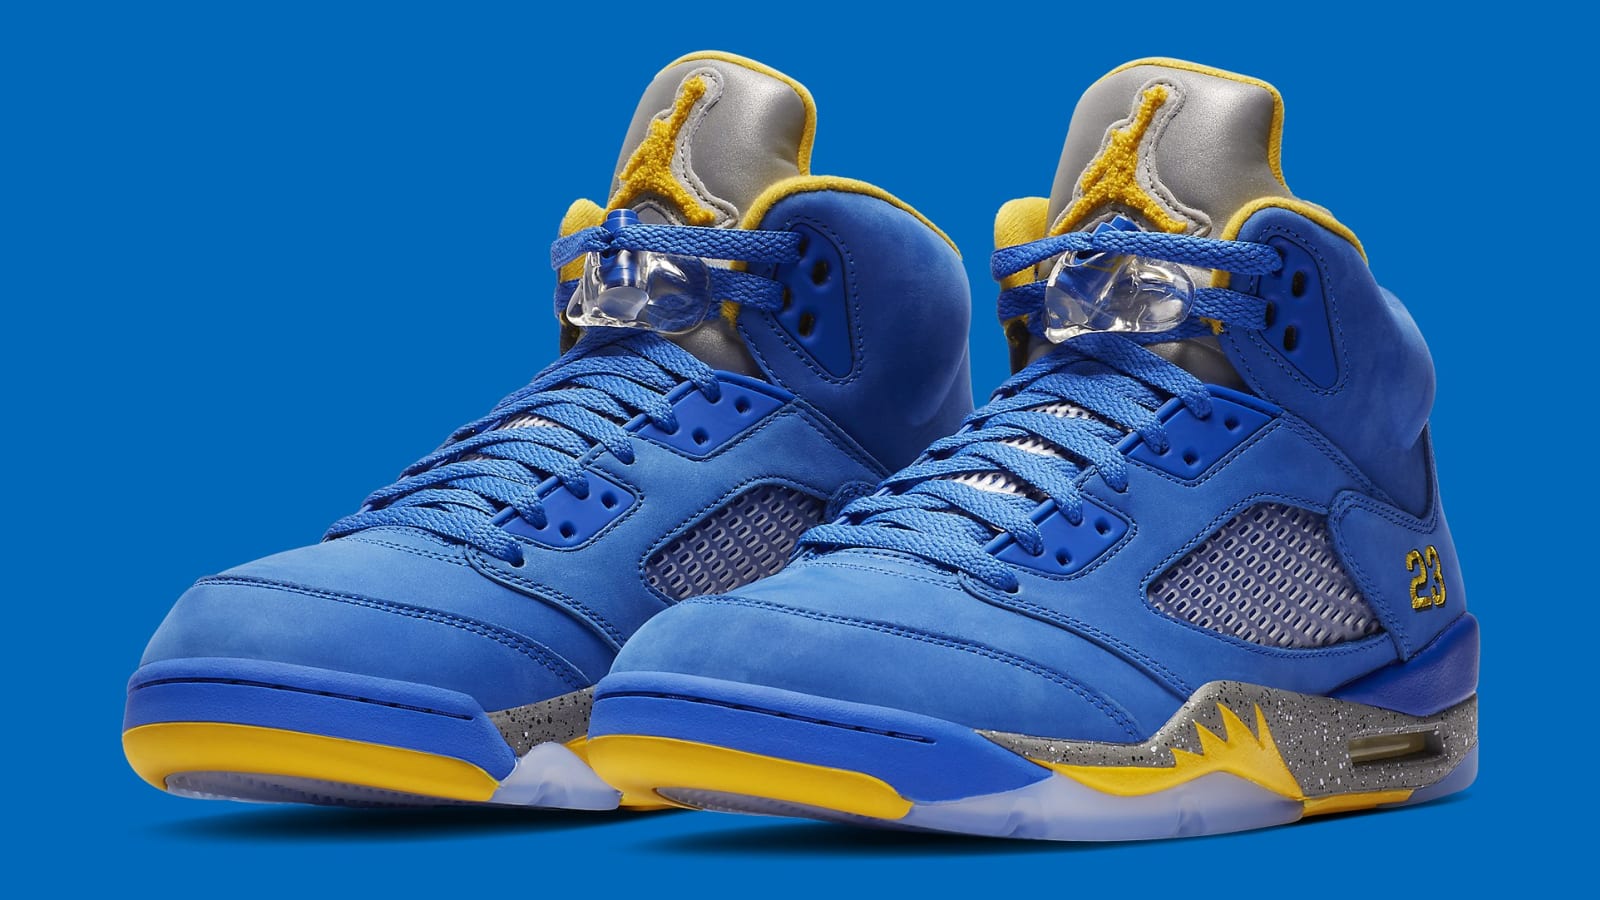 retro 5 blue and yellow